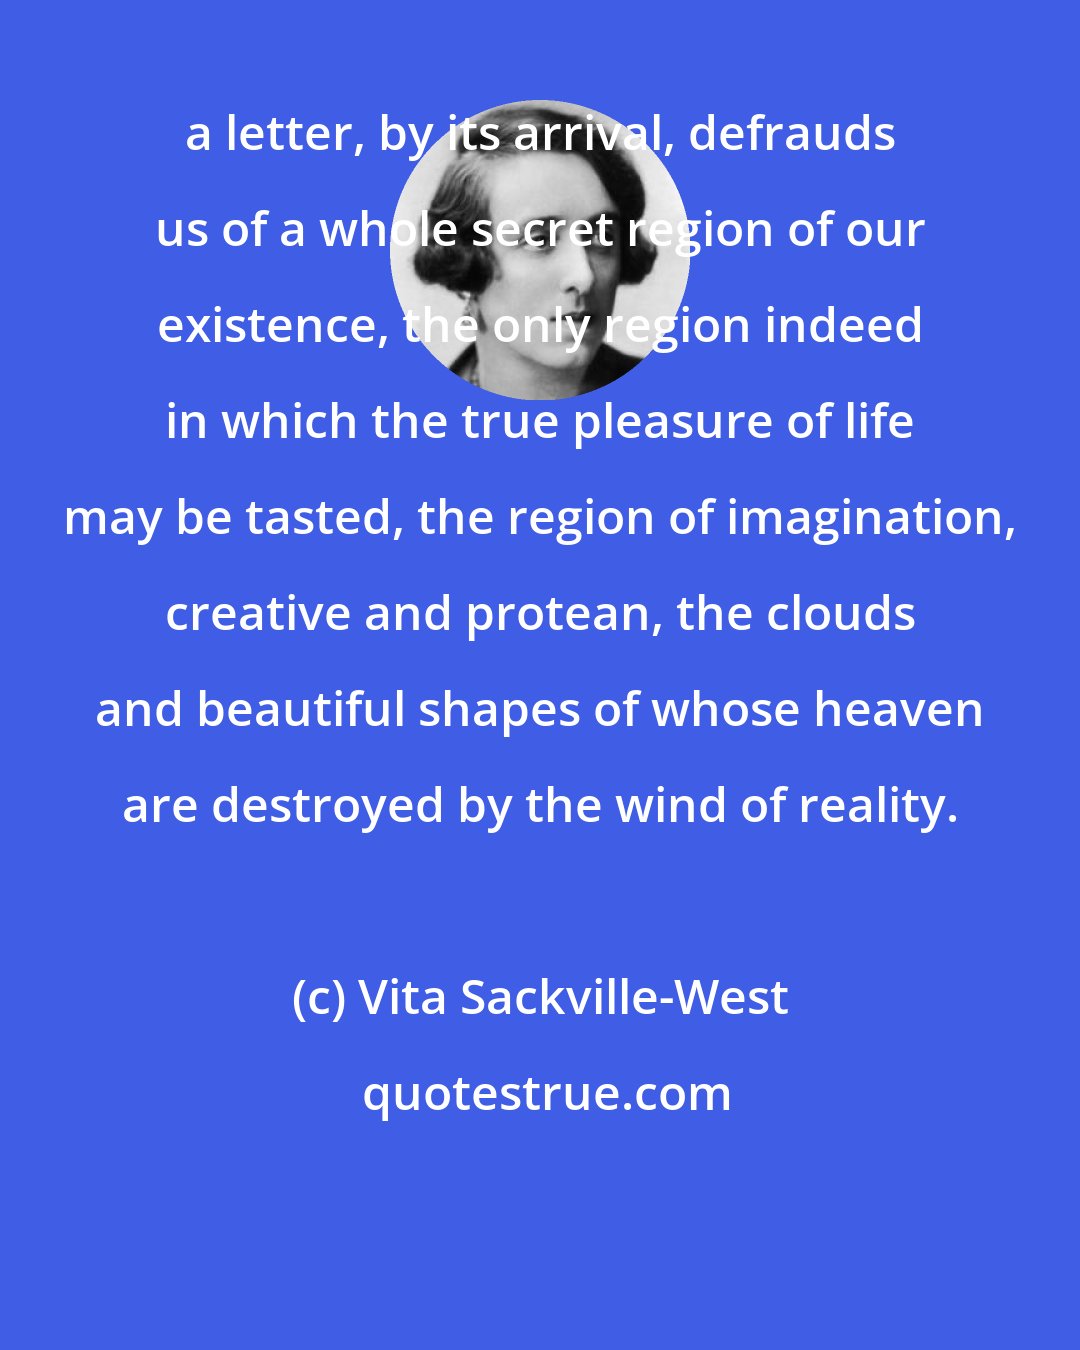 Vita Sackville-West: a letter, by its arrival, defrauds us of a whole secret region of our existence, the only region indeed in which the true pleasure of life may be tasted, the region of imagination, creative and protean, the clouds and beautiful shapes of whose heaven are destroyed by the wind of reality.